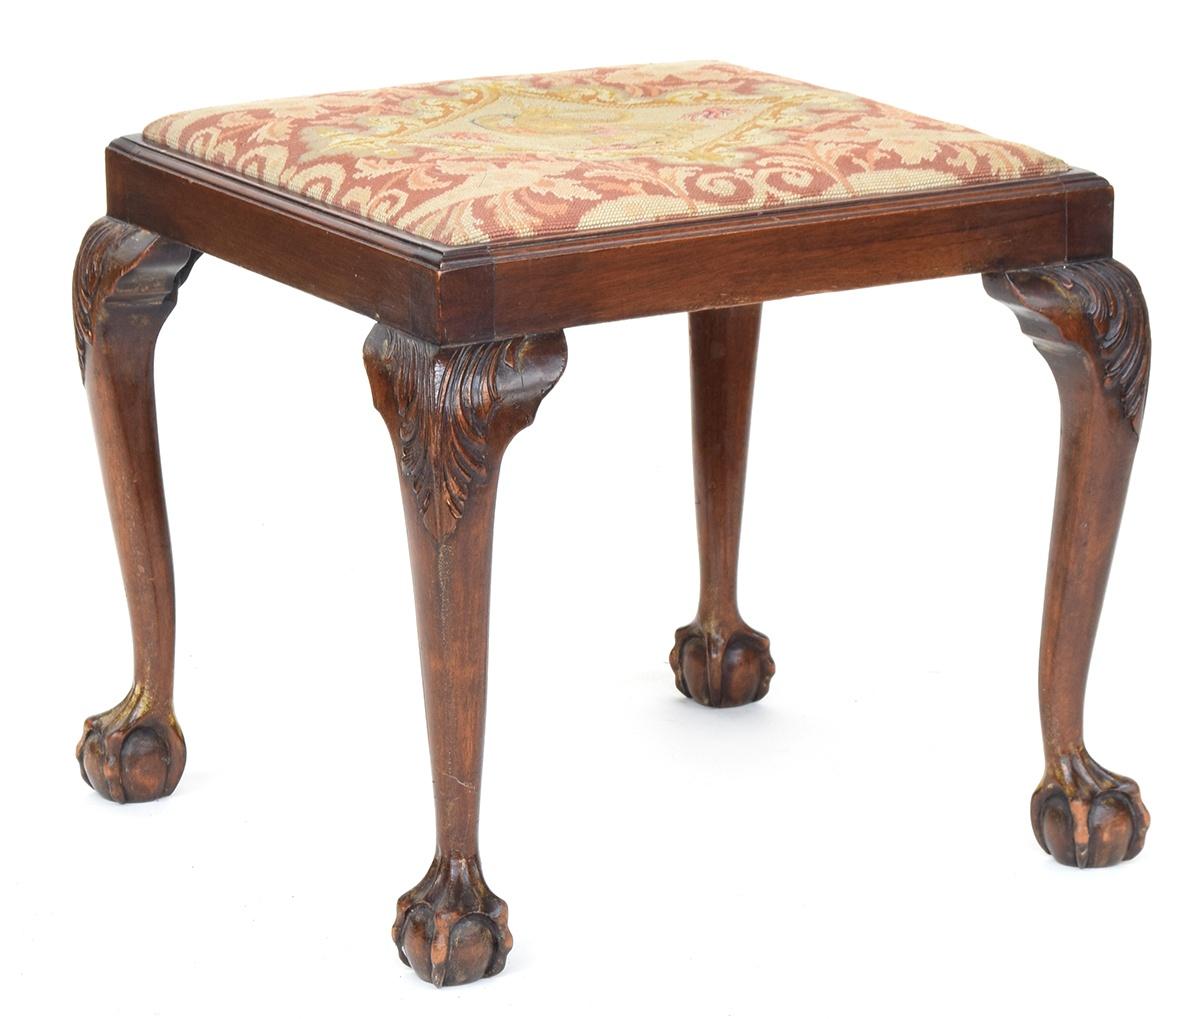 A 19th century foot stool with needlework drop in seat, on carved cabriole legs with ball and claw